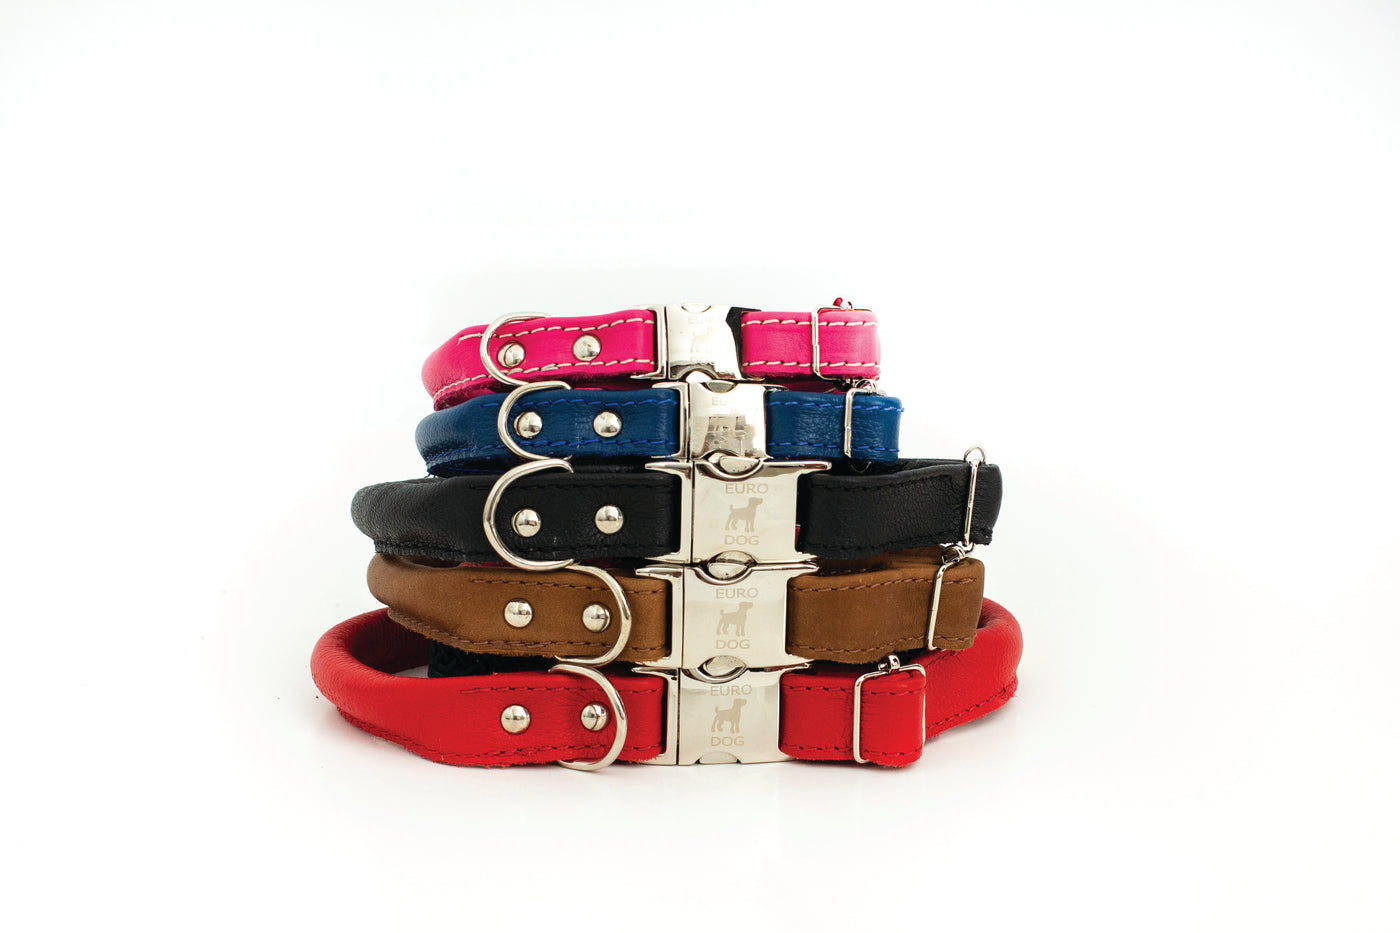 Euro Dog Soft Rolled Leather Dog Collar Quick Release Buckle Made in USA Affordable Luxury